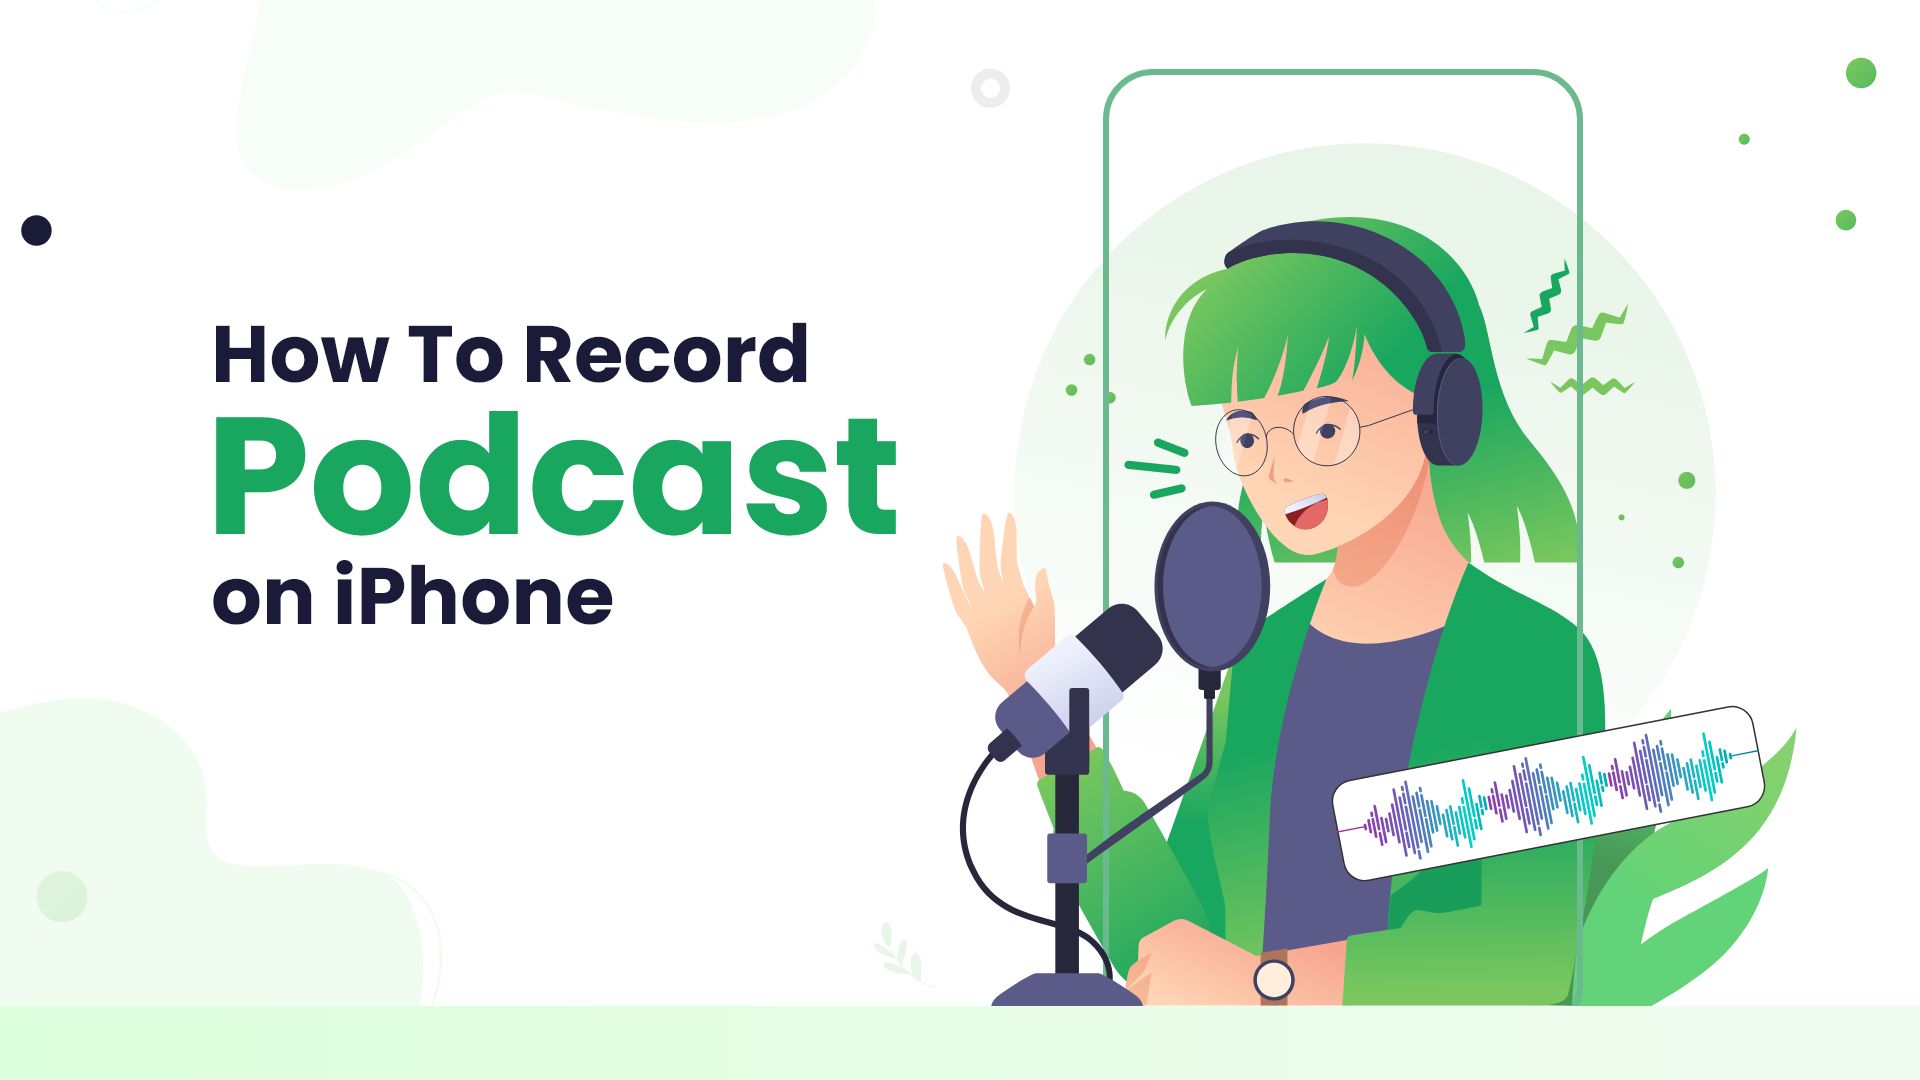 How to Record a Podcast on iPhone